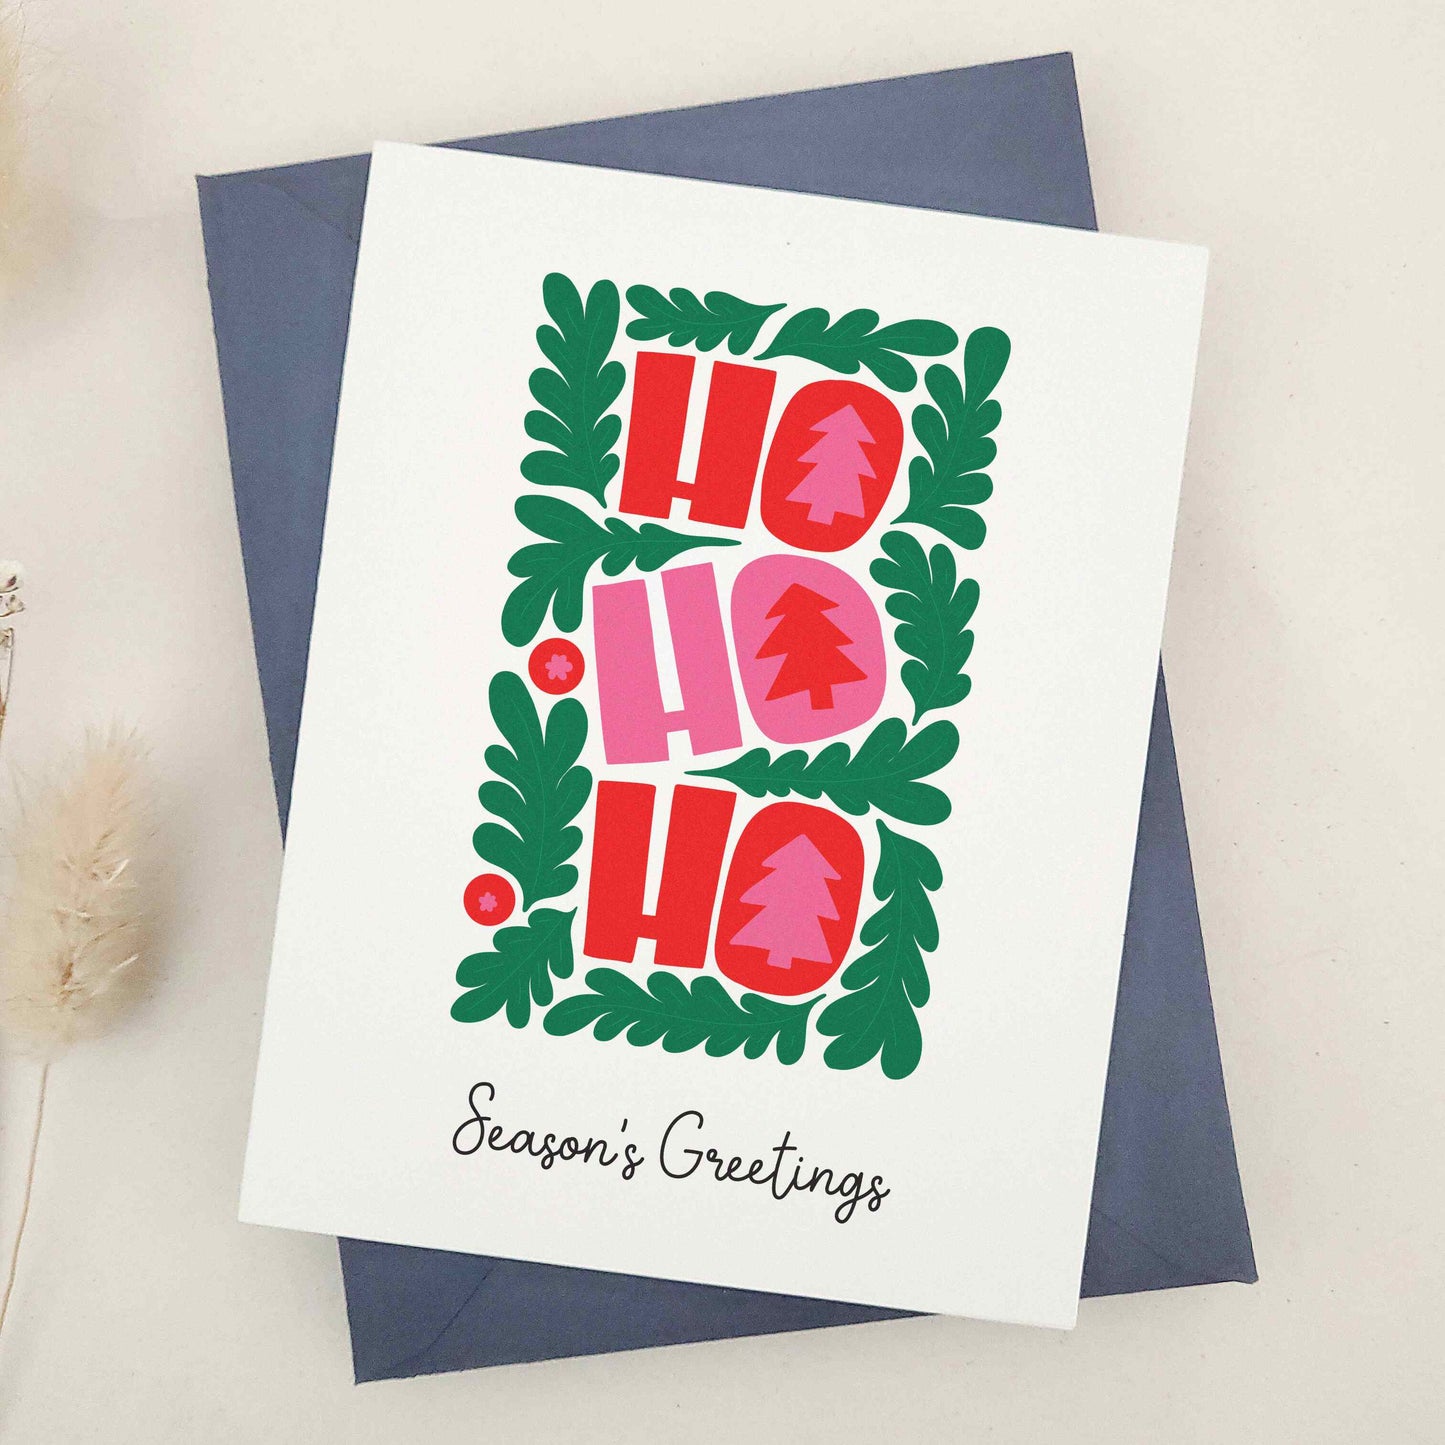 Spread holiday cheer with our vibrant 'HO HO HO' Season's Greetings card, featuring a festive wreath and bold Christmas trees, a delightful and eye-catching way to brighten the holiday season for friends and family.